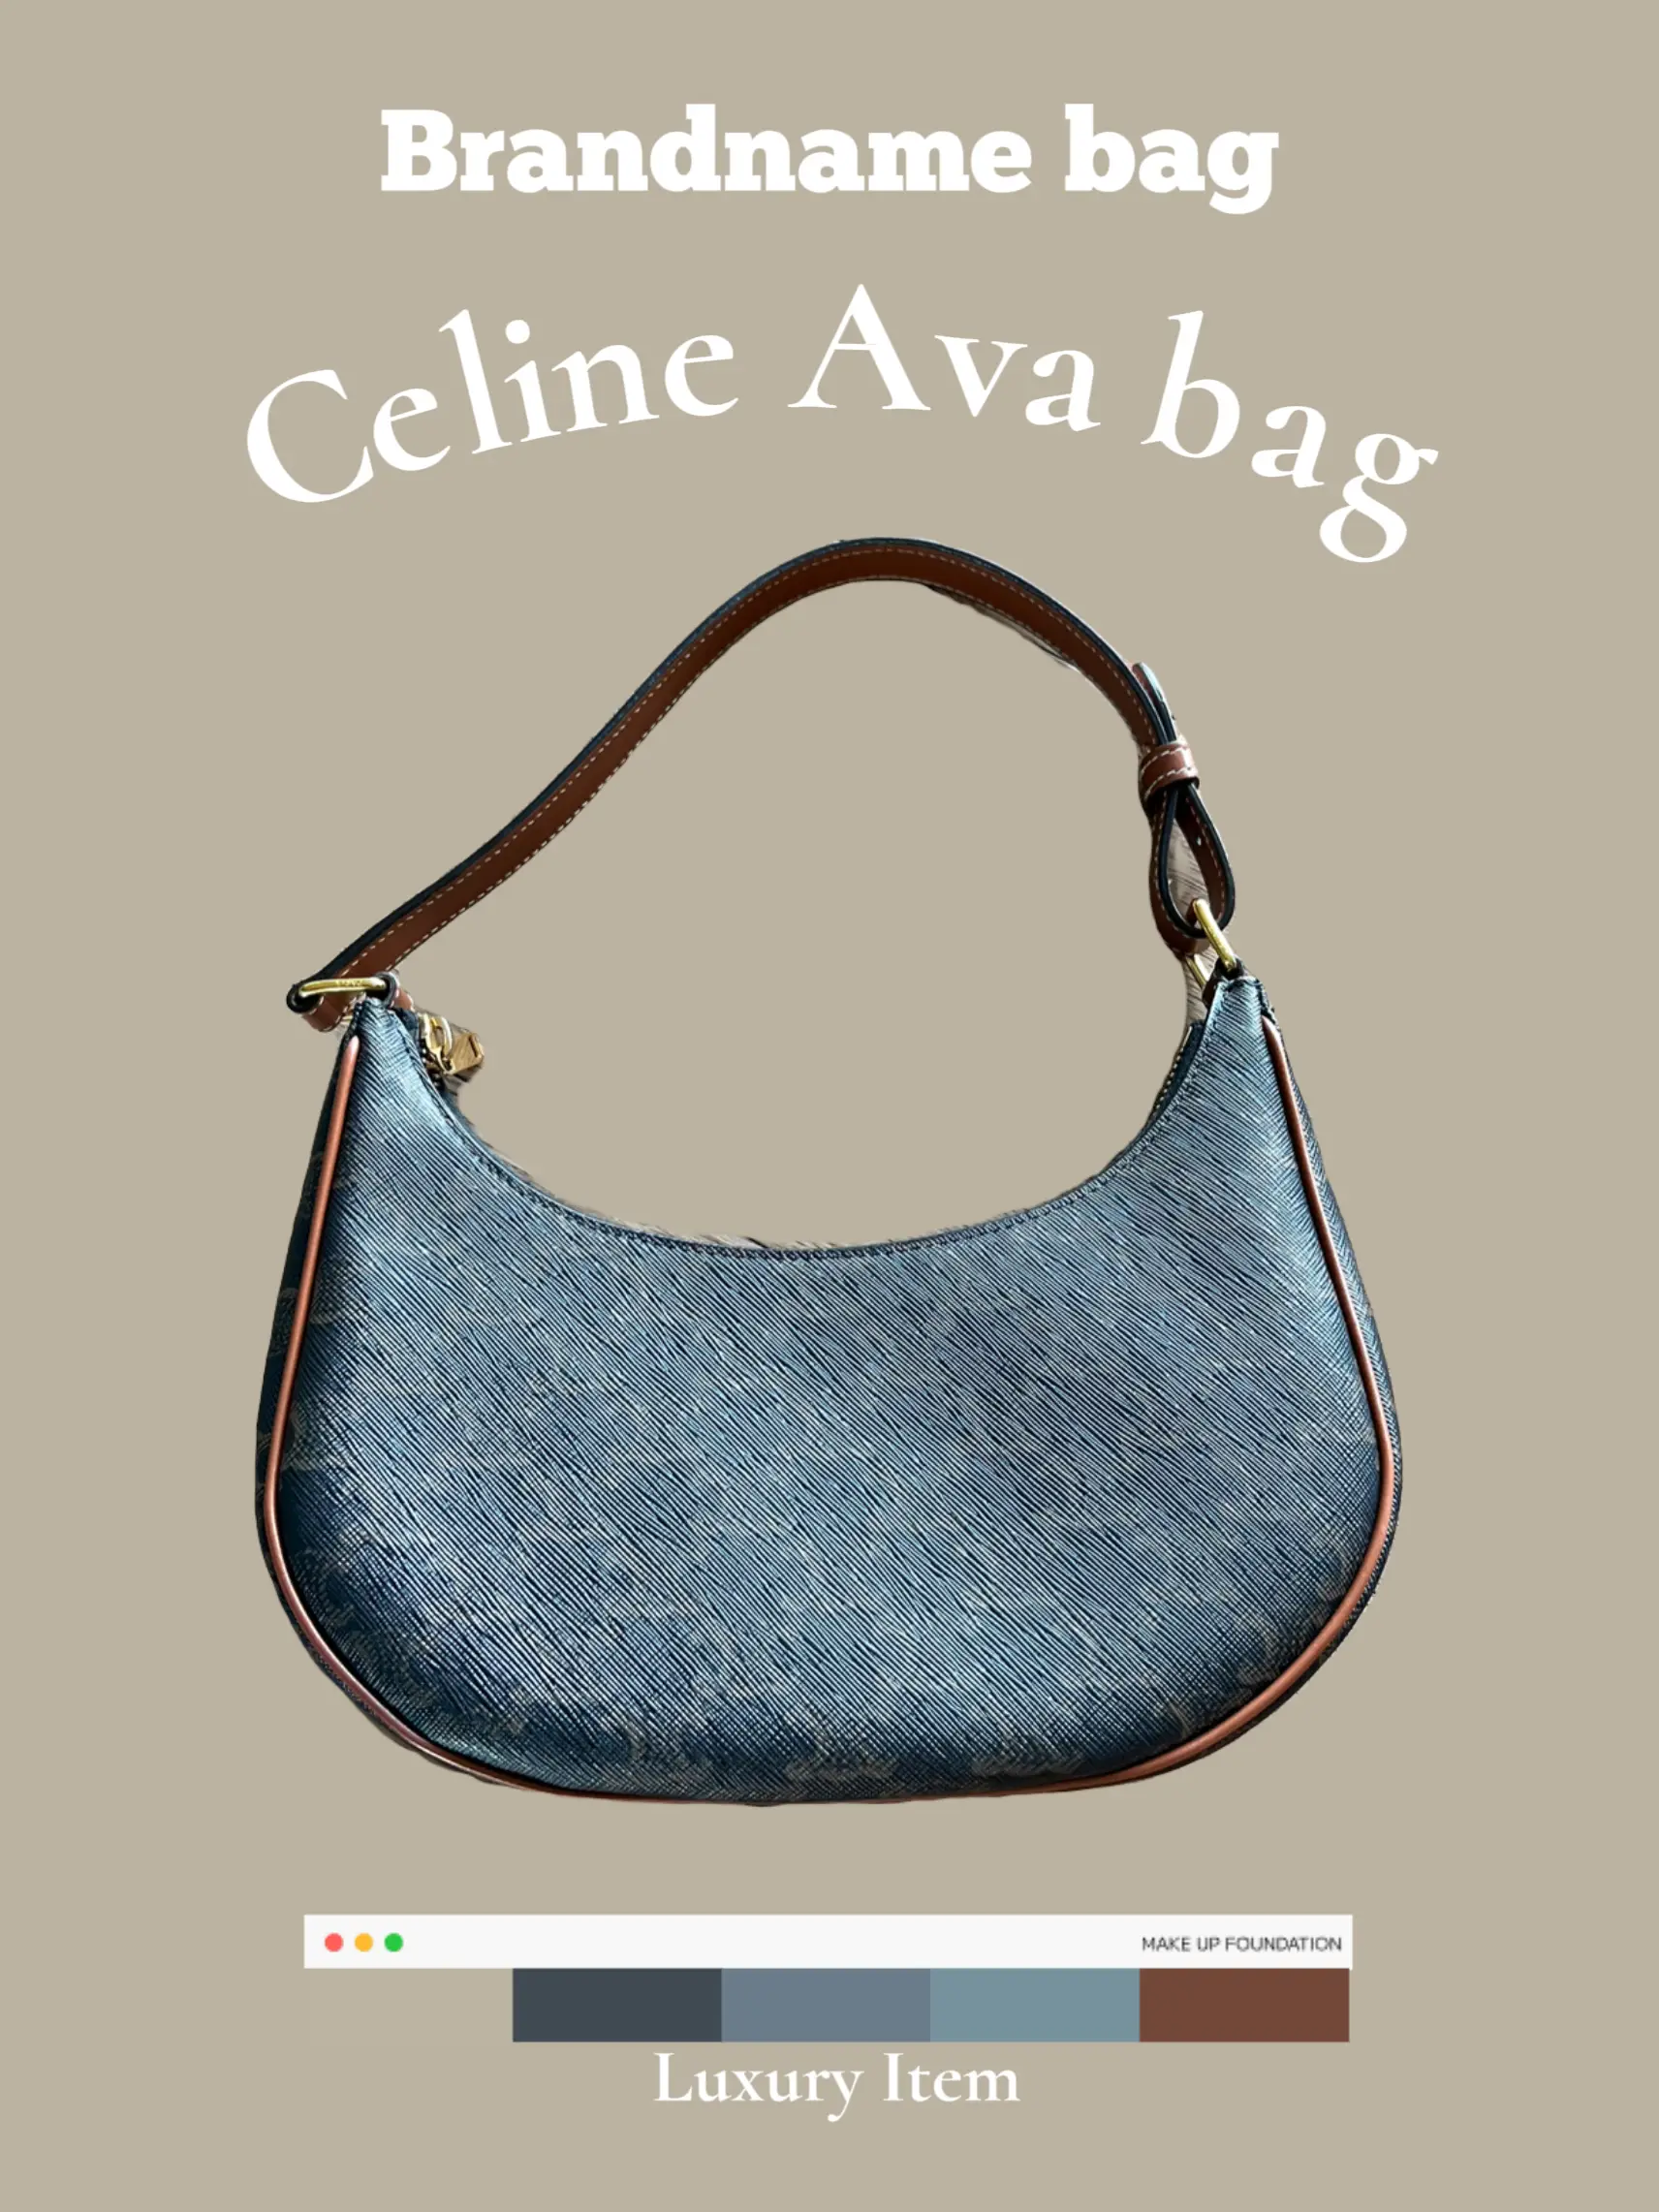 How much is it worth using Celine brand AVA bag / capacity? Let's